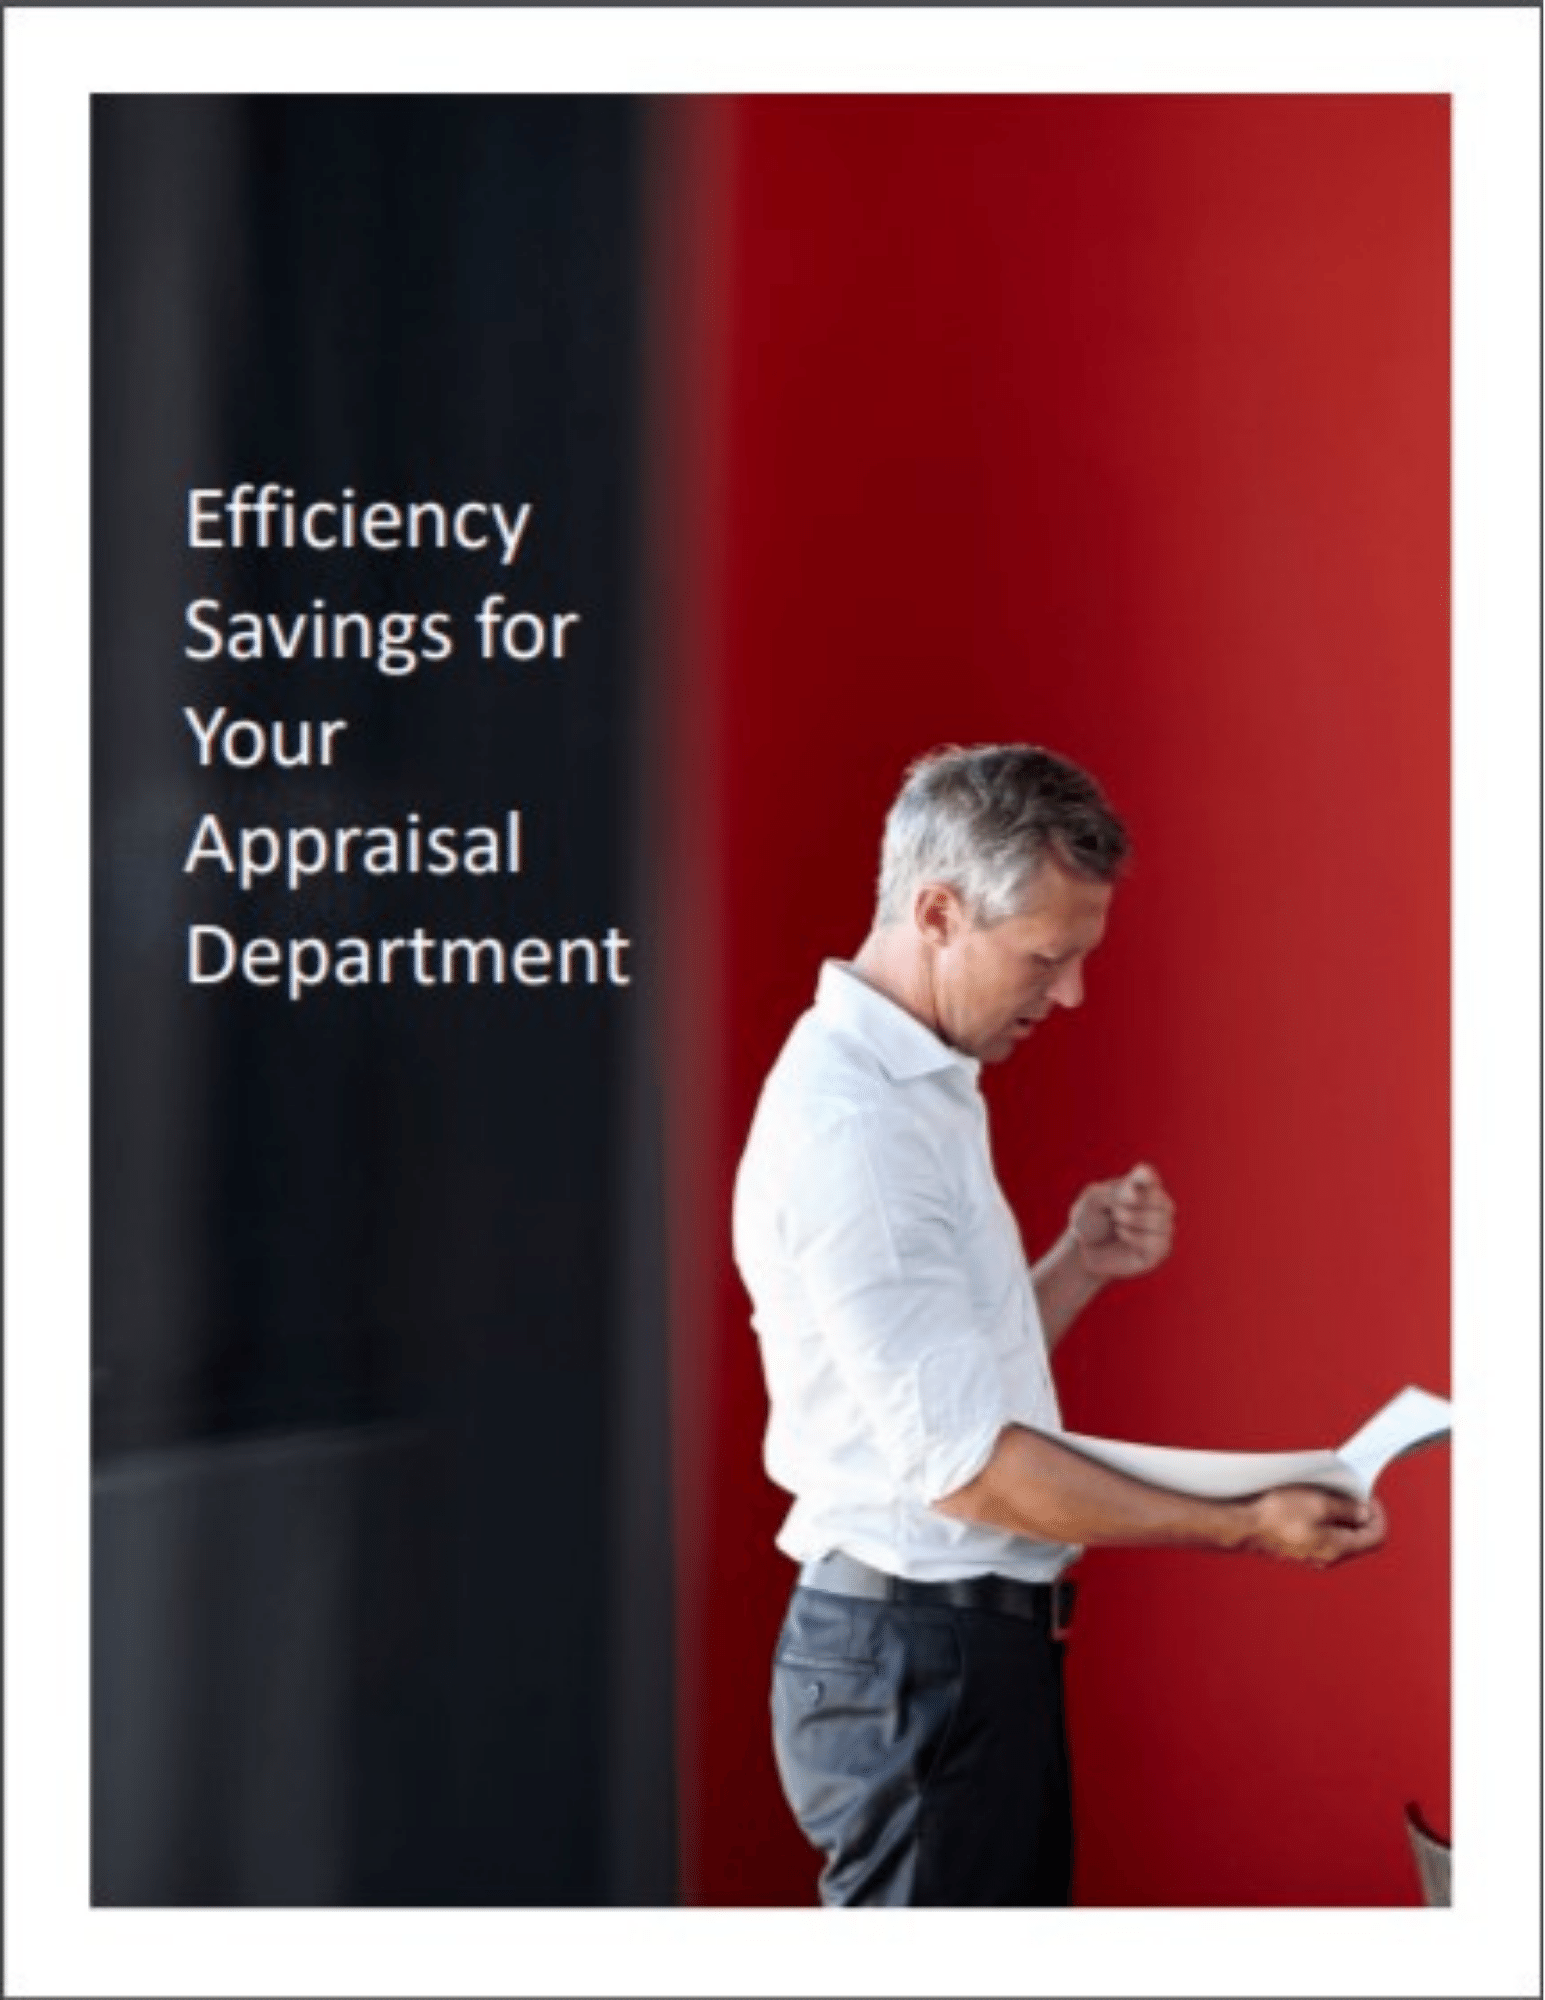 Efficiency_Savings_for_your_Appraisal_Department_White_Paper